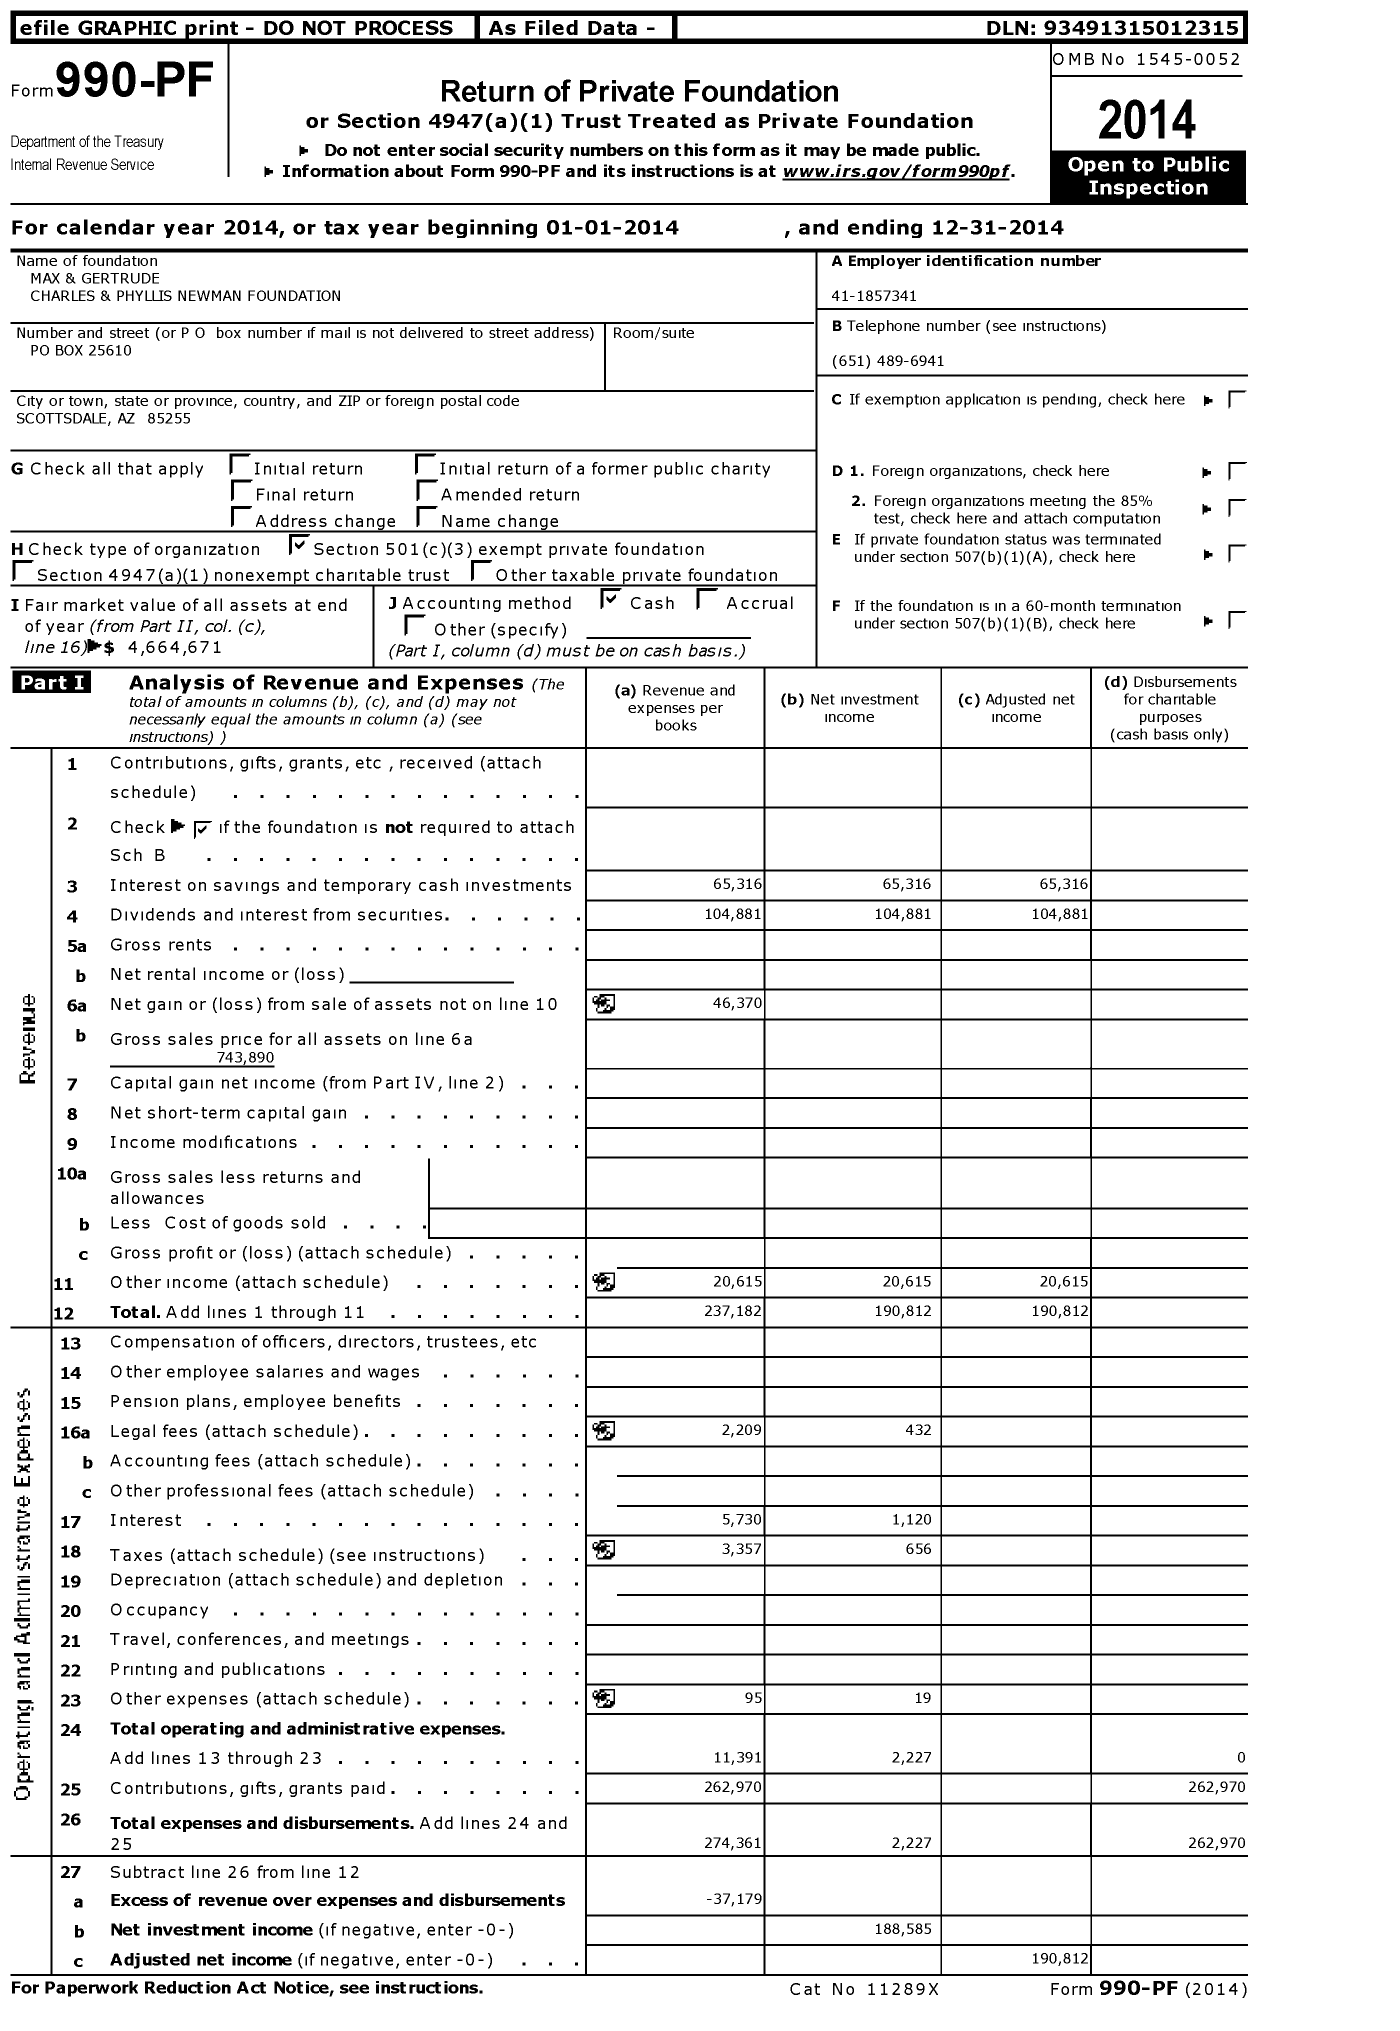 Image of first page of 2014 Form 990PF for Max and Gertrude Charles and Phyllis Newman Foundation